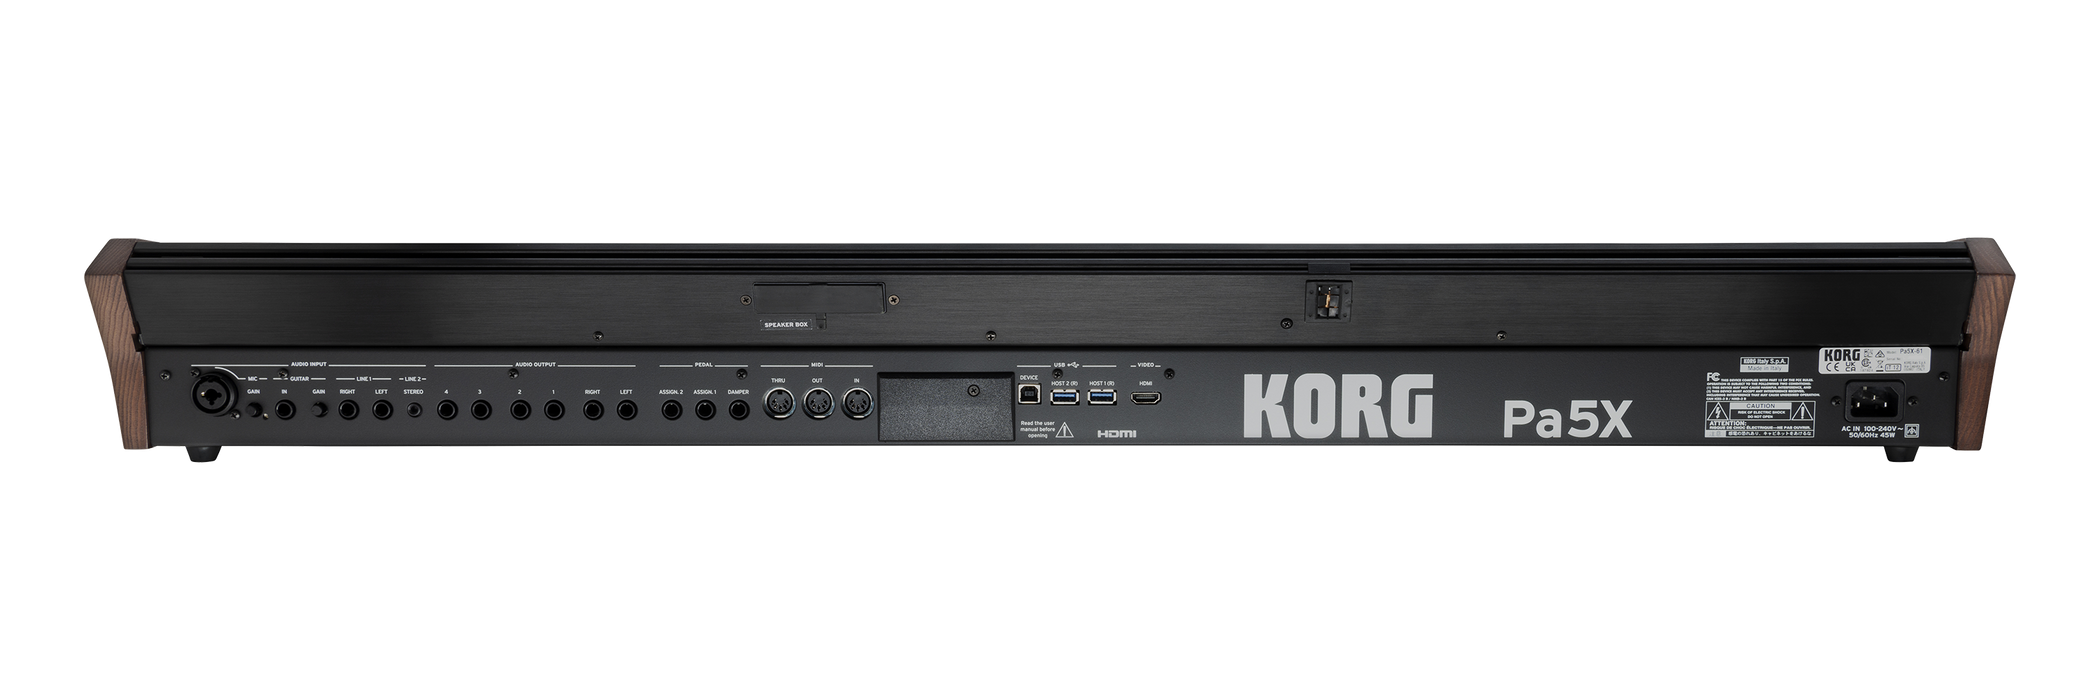 Korg - PA5X76 - 76 semi weighted RX arranger